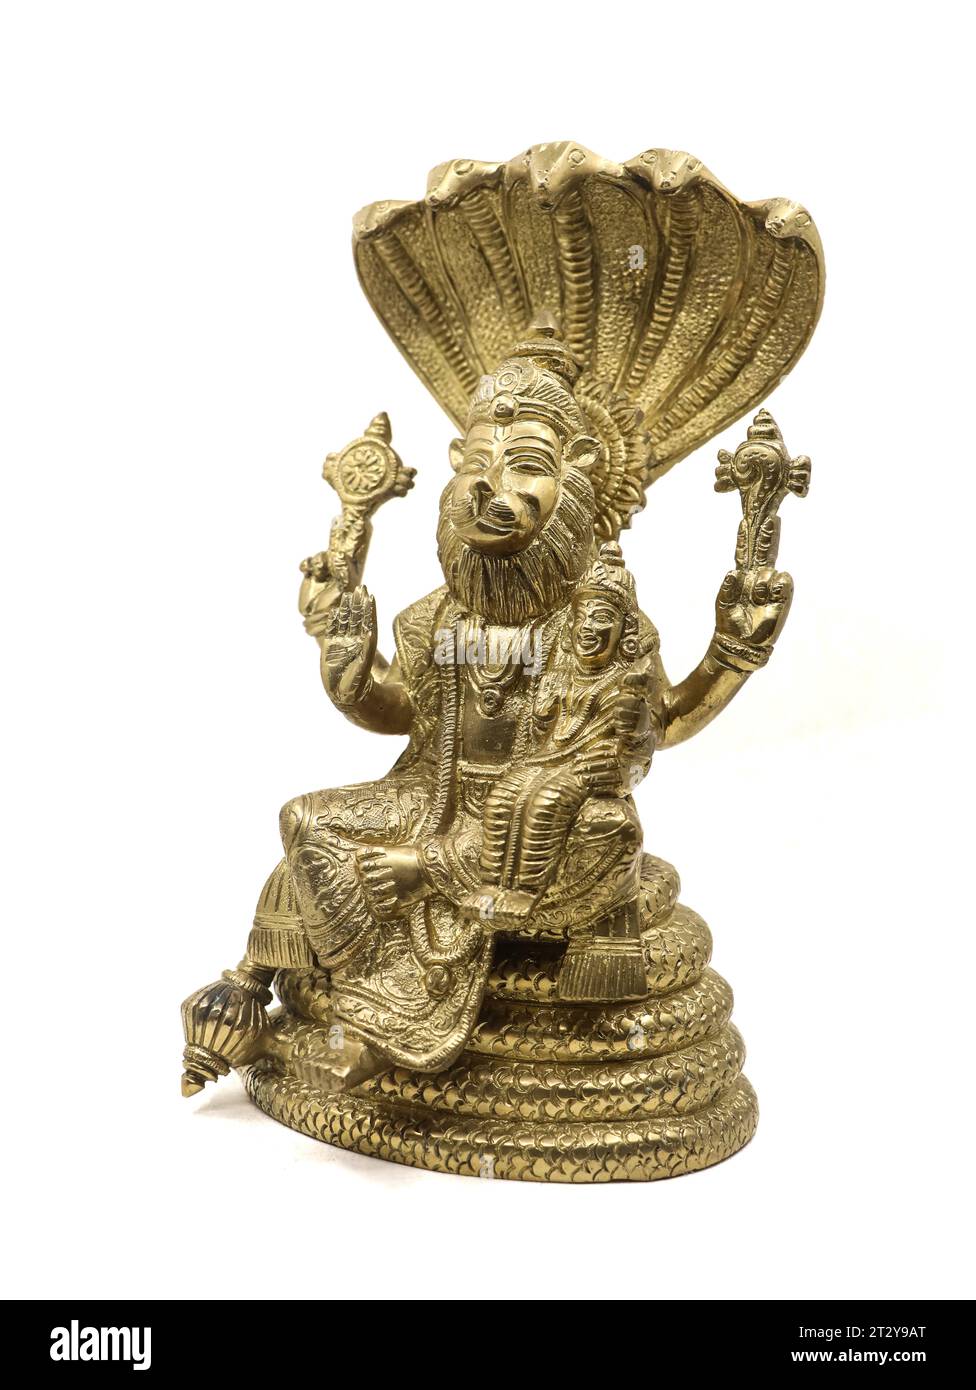 golden statue of lord vishnu avatar, narasimha lion faced with multiple hands sitting on a snake with multiple heads next to goddess lakshmi, isolated Stock Photo